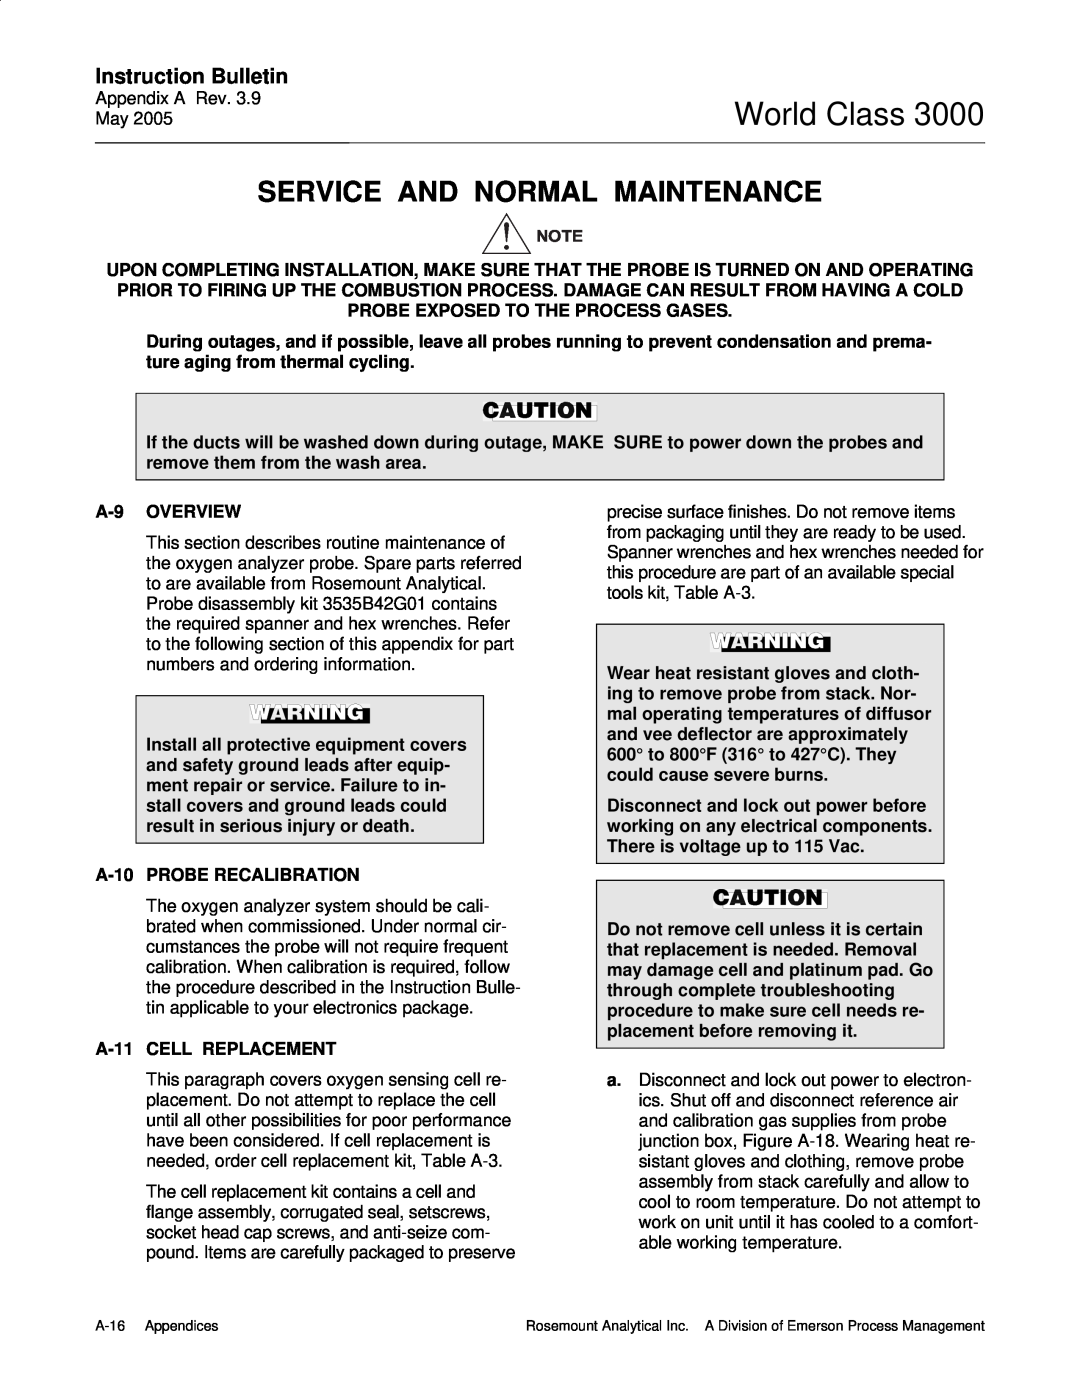 Emerson 3000 Service And Normal Maintenance, World Class, Instruction Bulletin, A-9OVERVIEW, A-10PROBE RECALIBRATION 